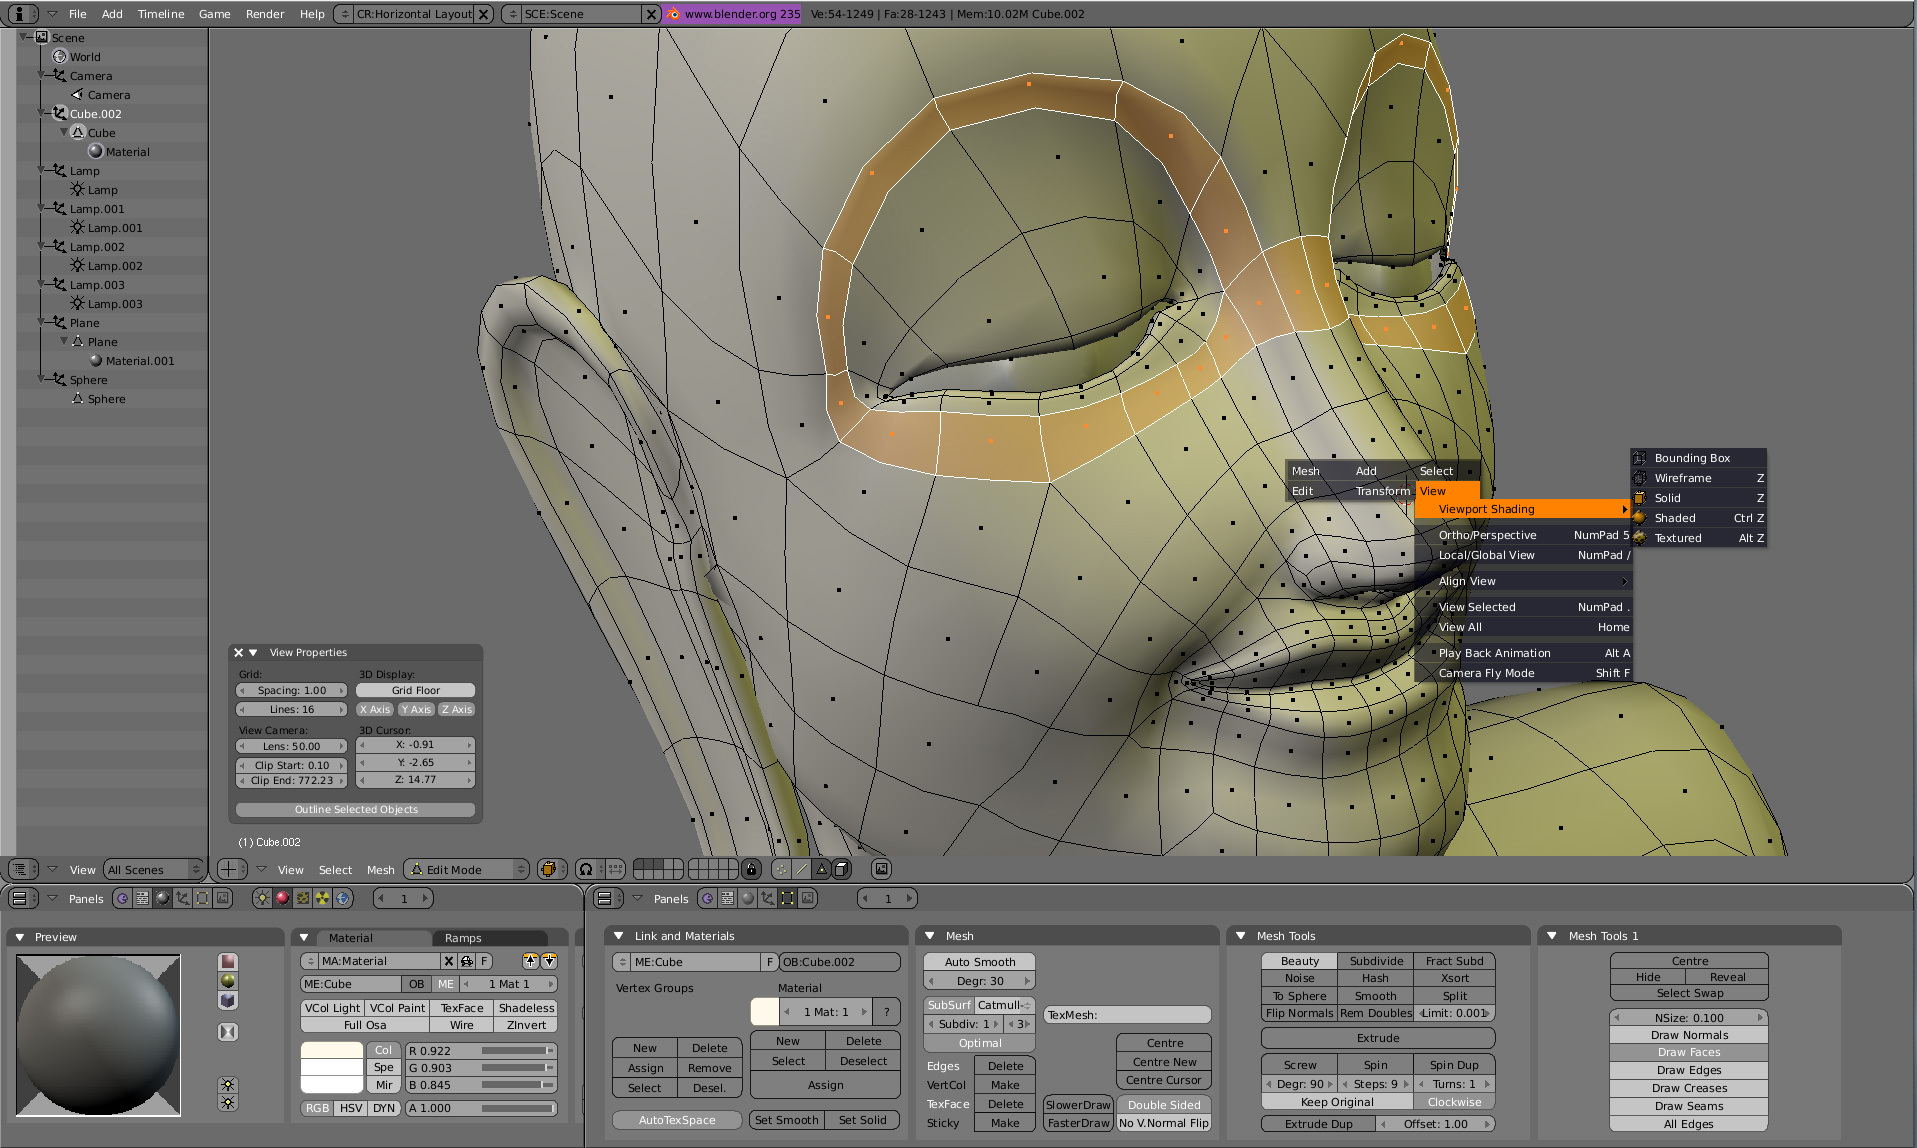 The Blender modeling and shading interface.